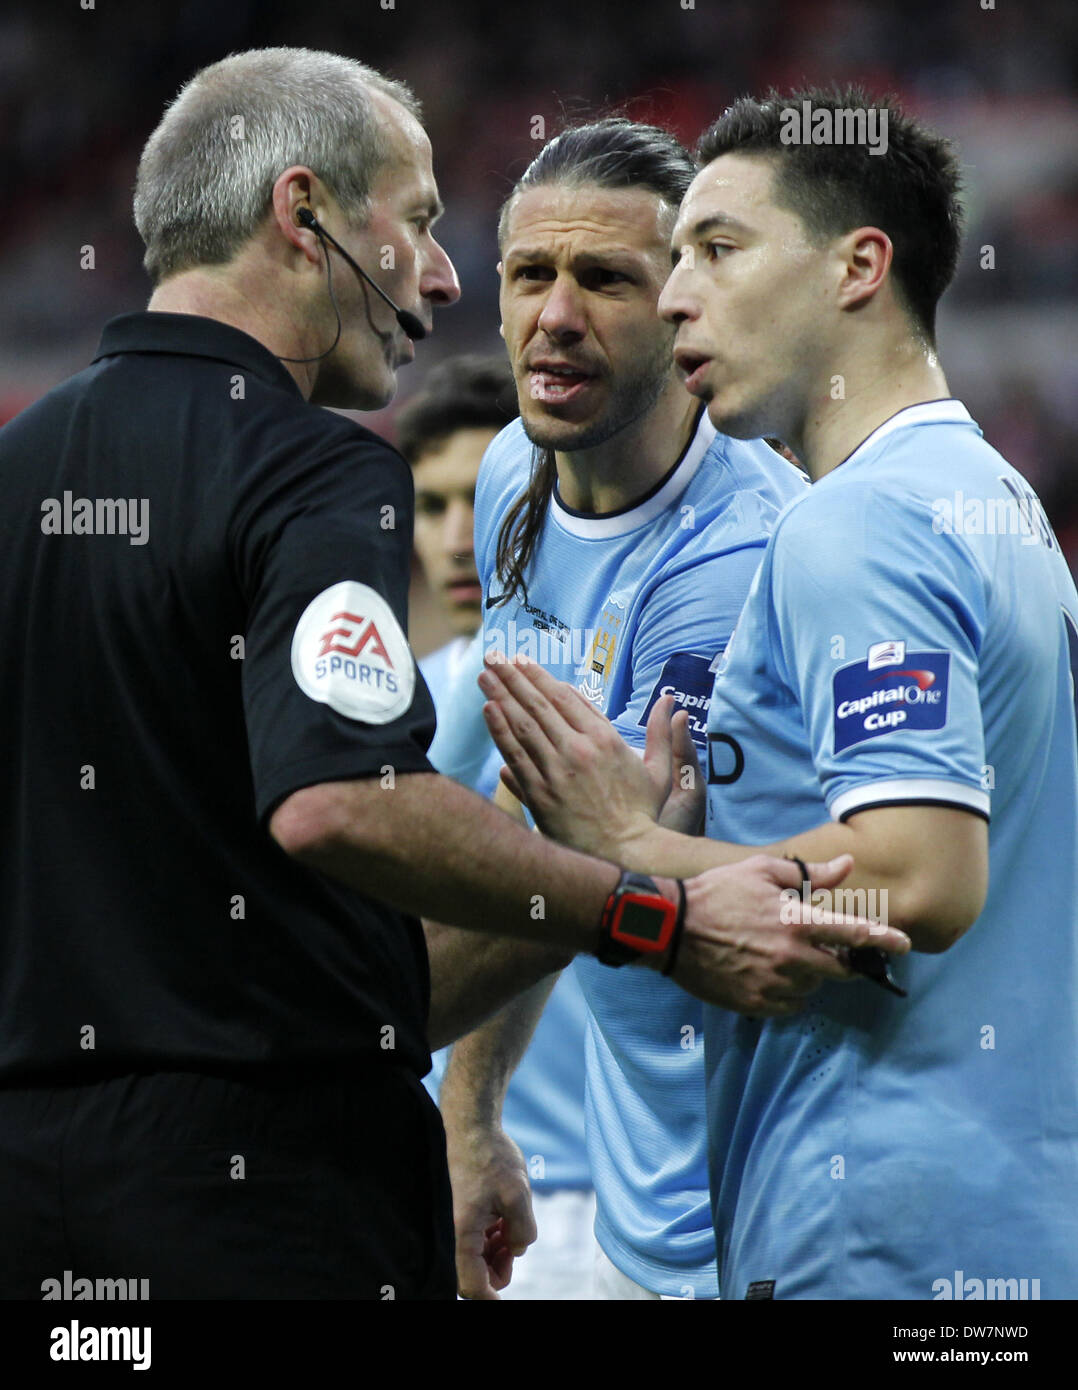 London. 2nd Mar, 2014. Samir Nasri(R) and Martin Demichelis (C) of Manchester City argues with referee Martin Atkinso during the Capital One Cup(The League Cup) Final between Manchester City and Sunderland at Wembley Stadium in London, Britain on March 2, 2014. Manchester City won 3-1. © Wang Lili/Xinhua/Alamy Live News Stock Photo